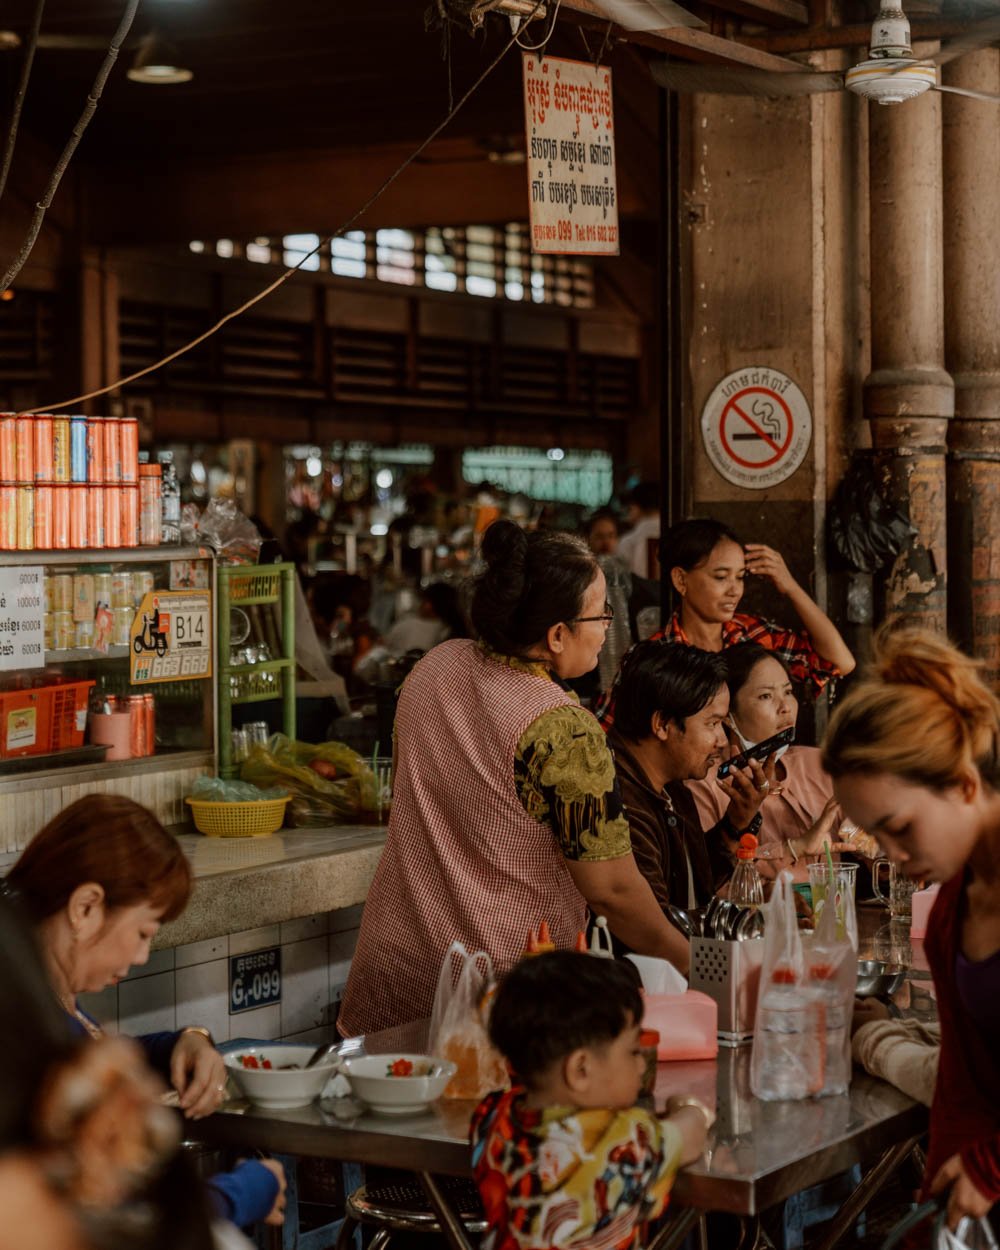 Things to do in Phnom Penh - Explore Central Market